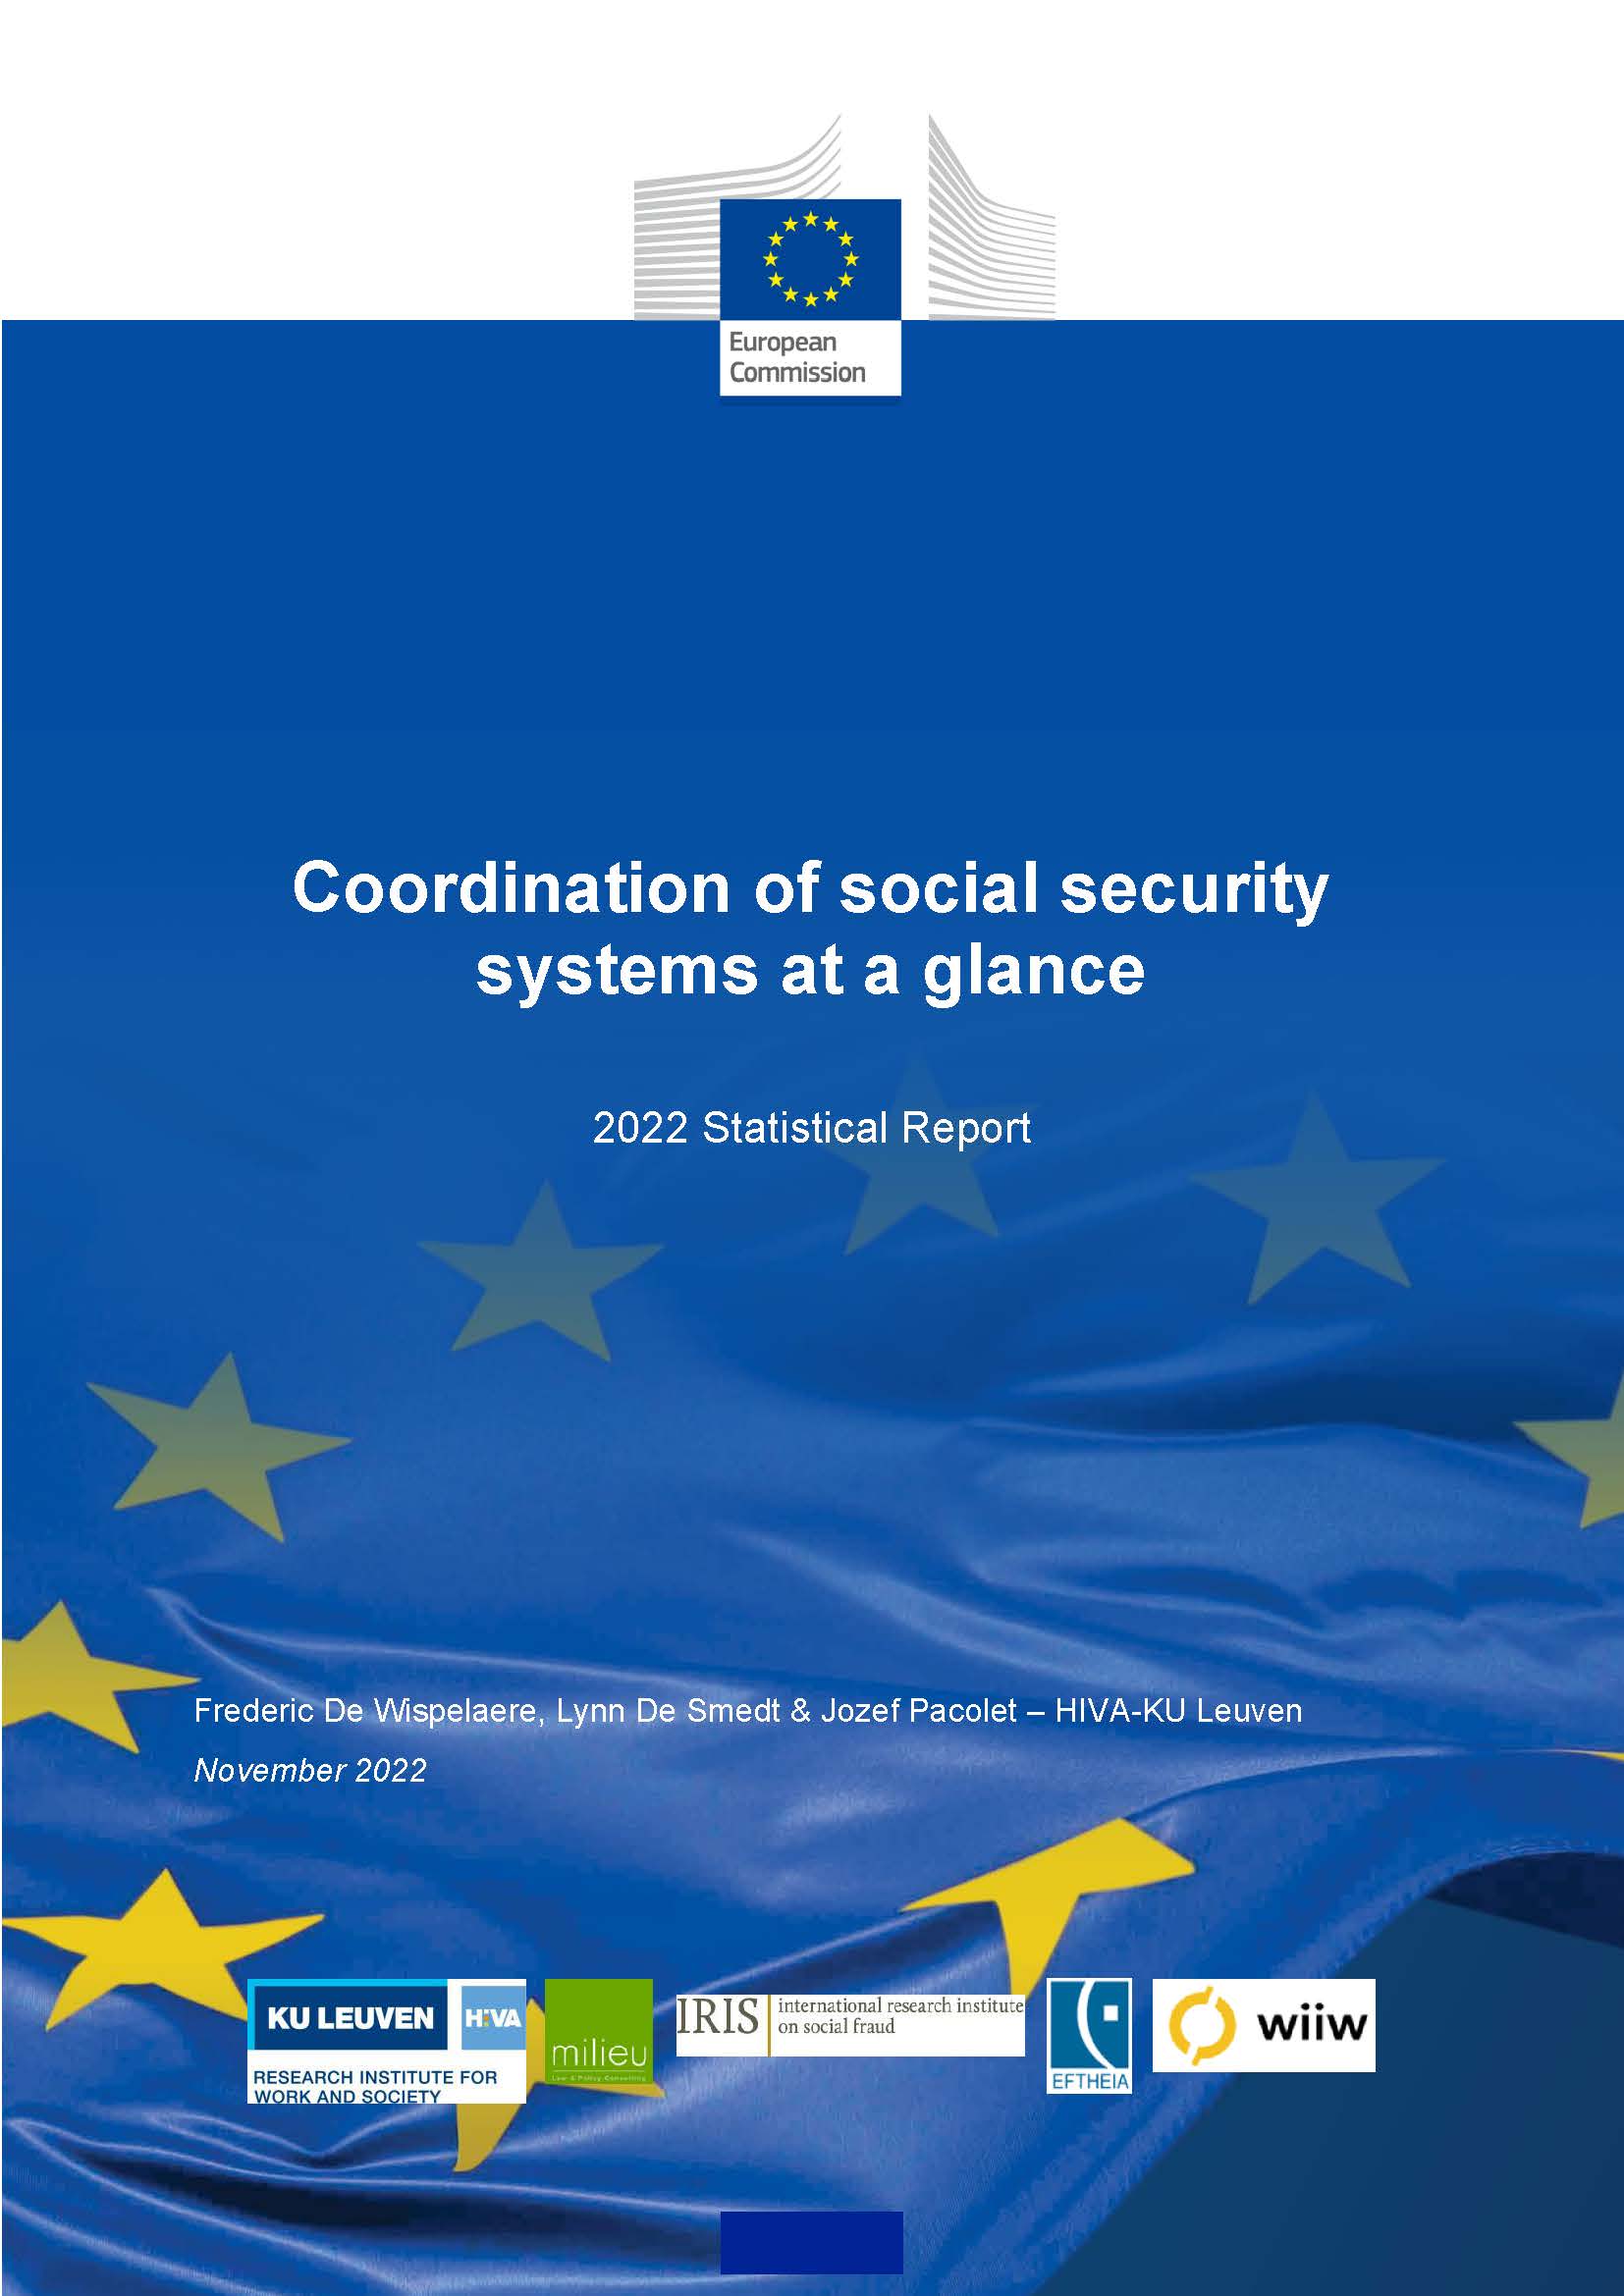 Coordination of social security systems at a glance -
2022 Statistical Report